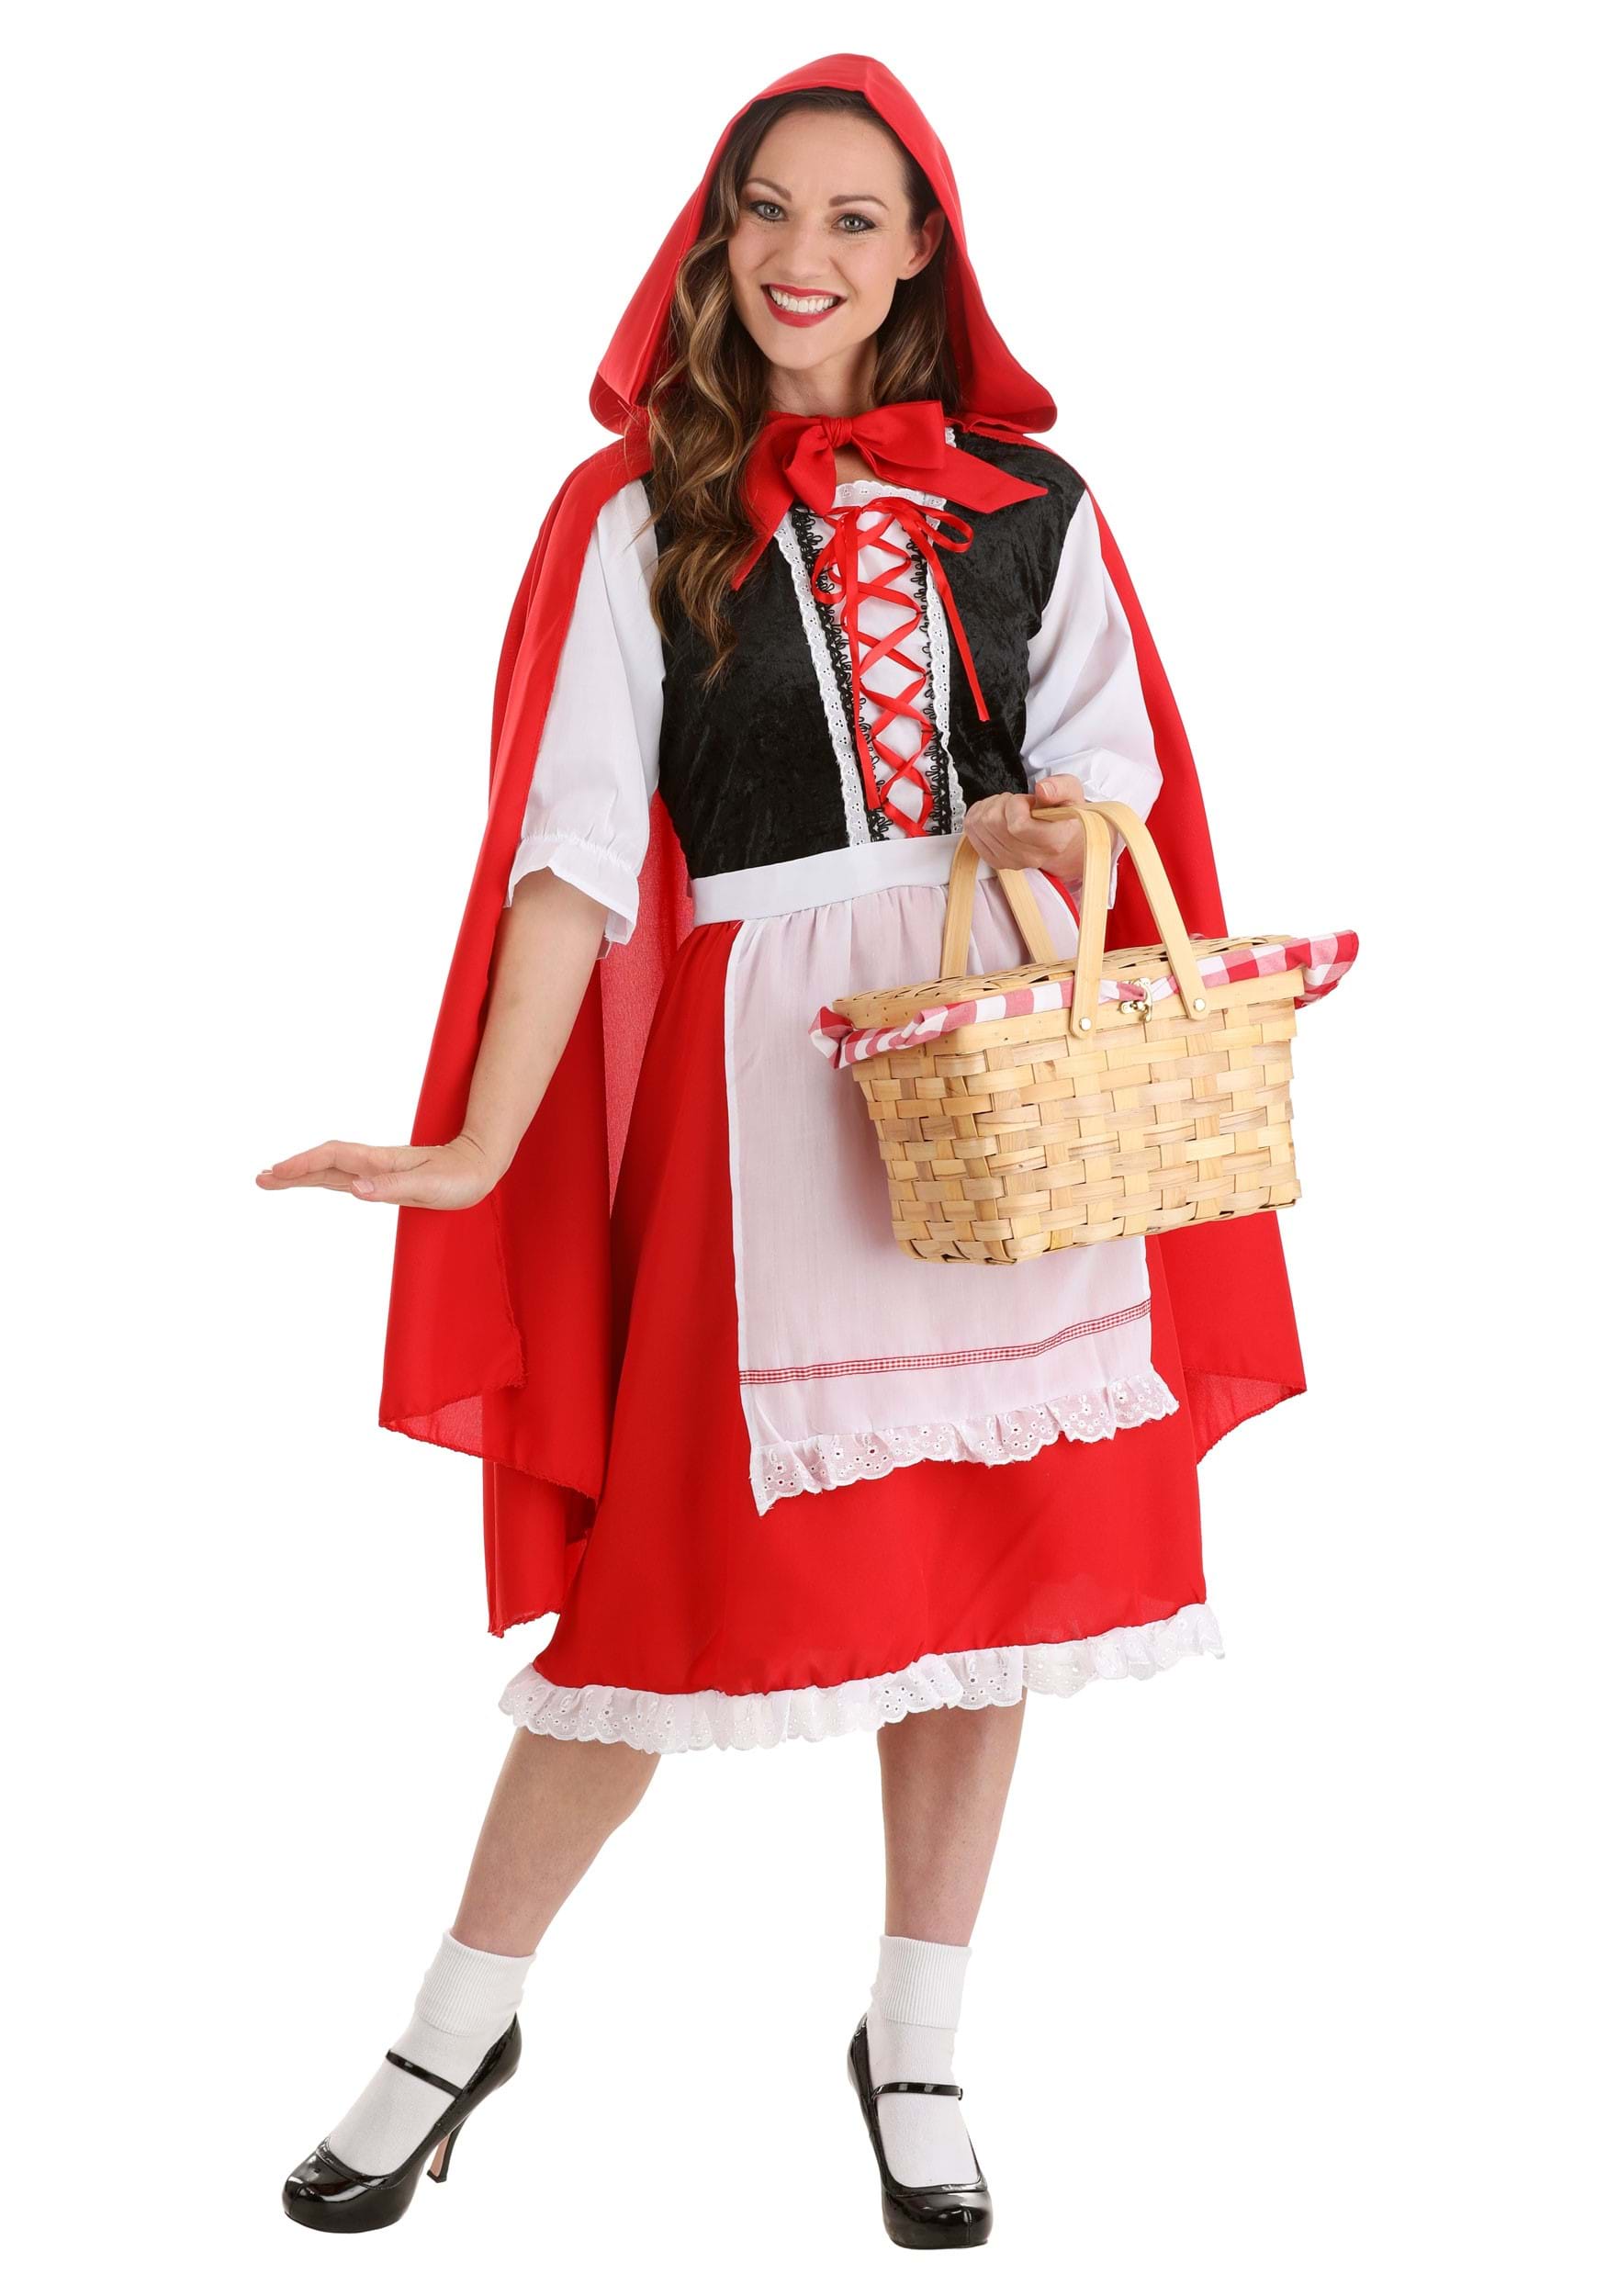 Details about   I Adult Underwraps Little Red Riding Hood Halloween Costume Size M/L 